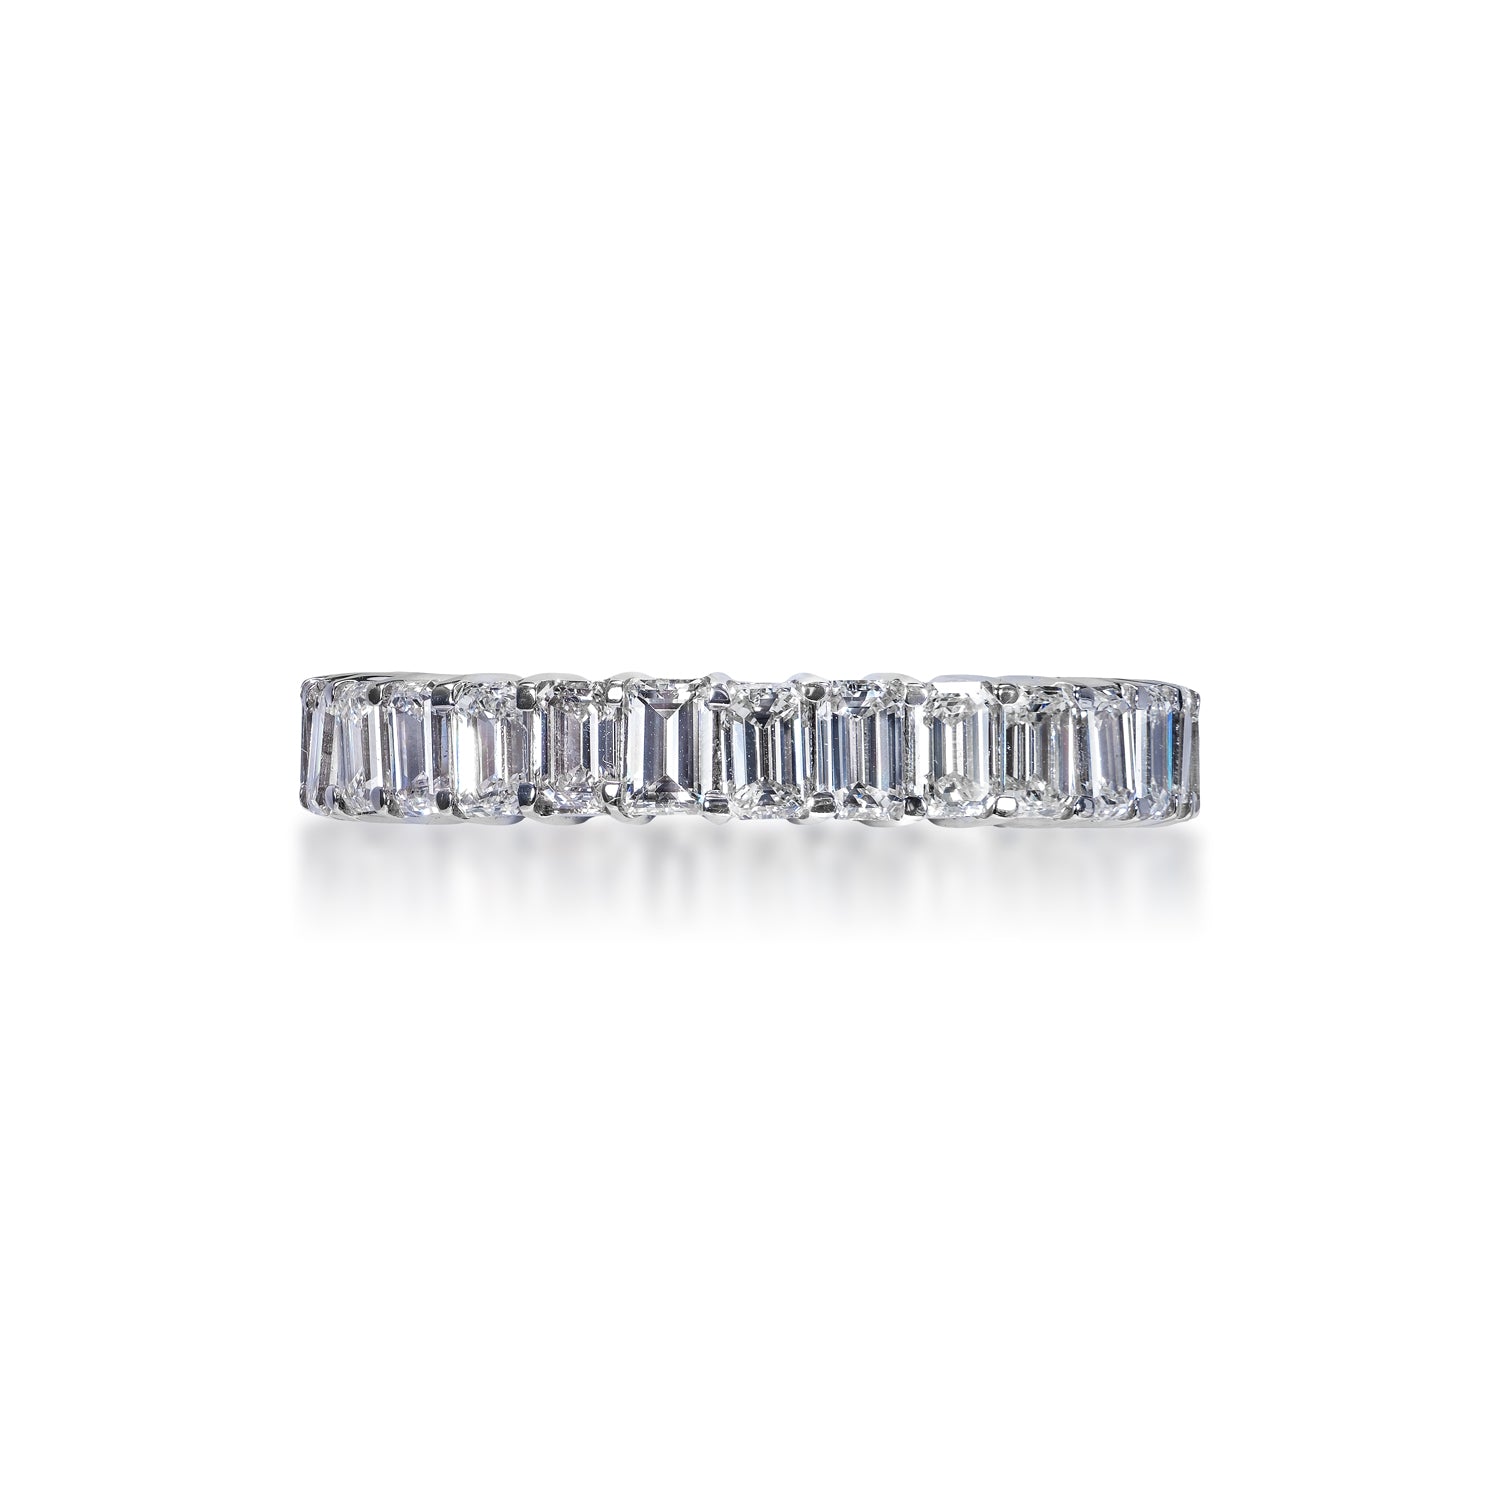 Rylie 4 Carat Emerald Cut Diamond Eternity Ring in 14k White Gold Shared Prong Front View